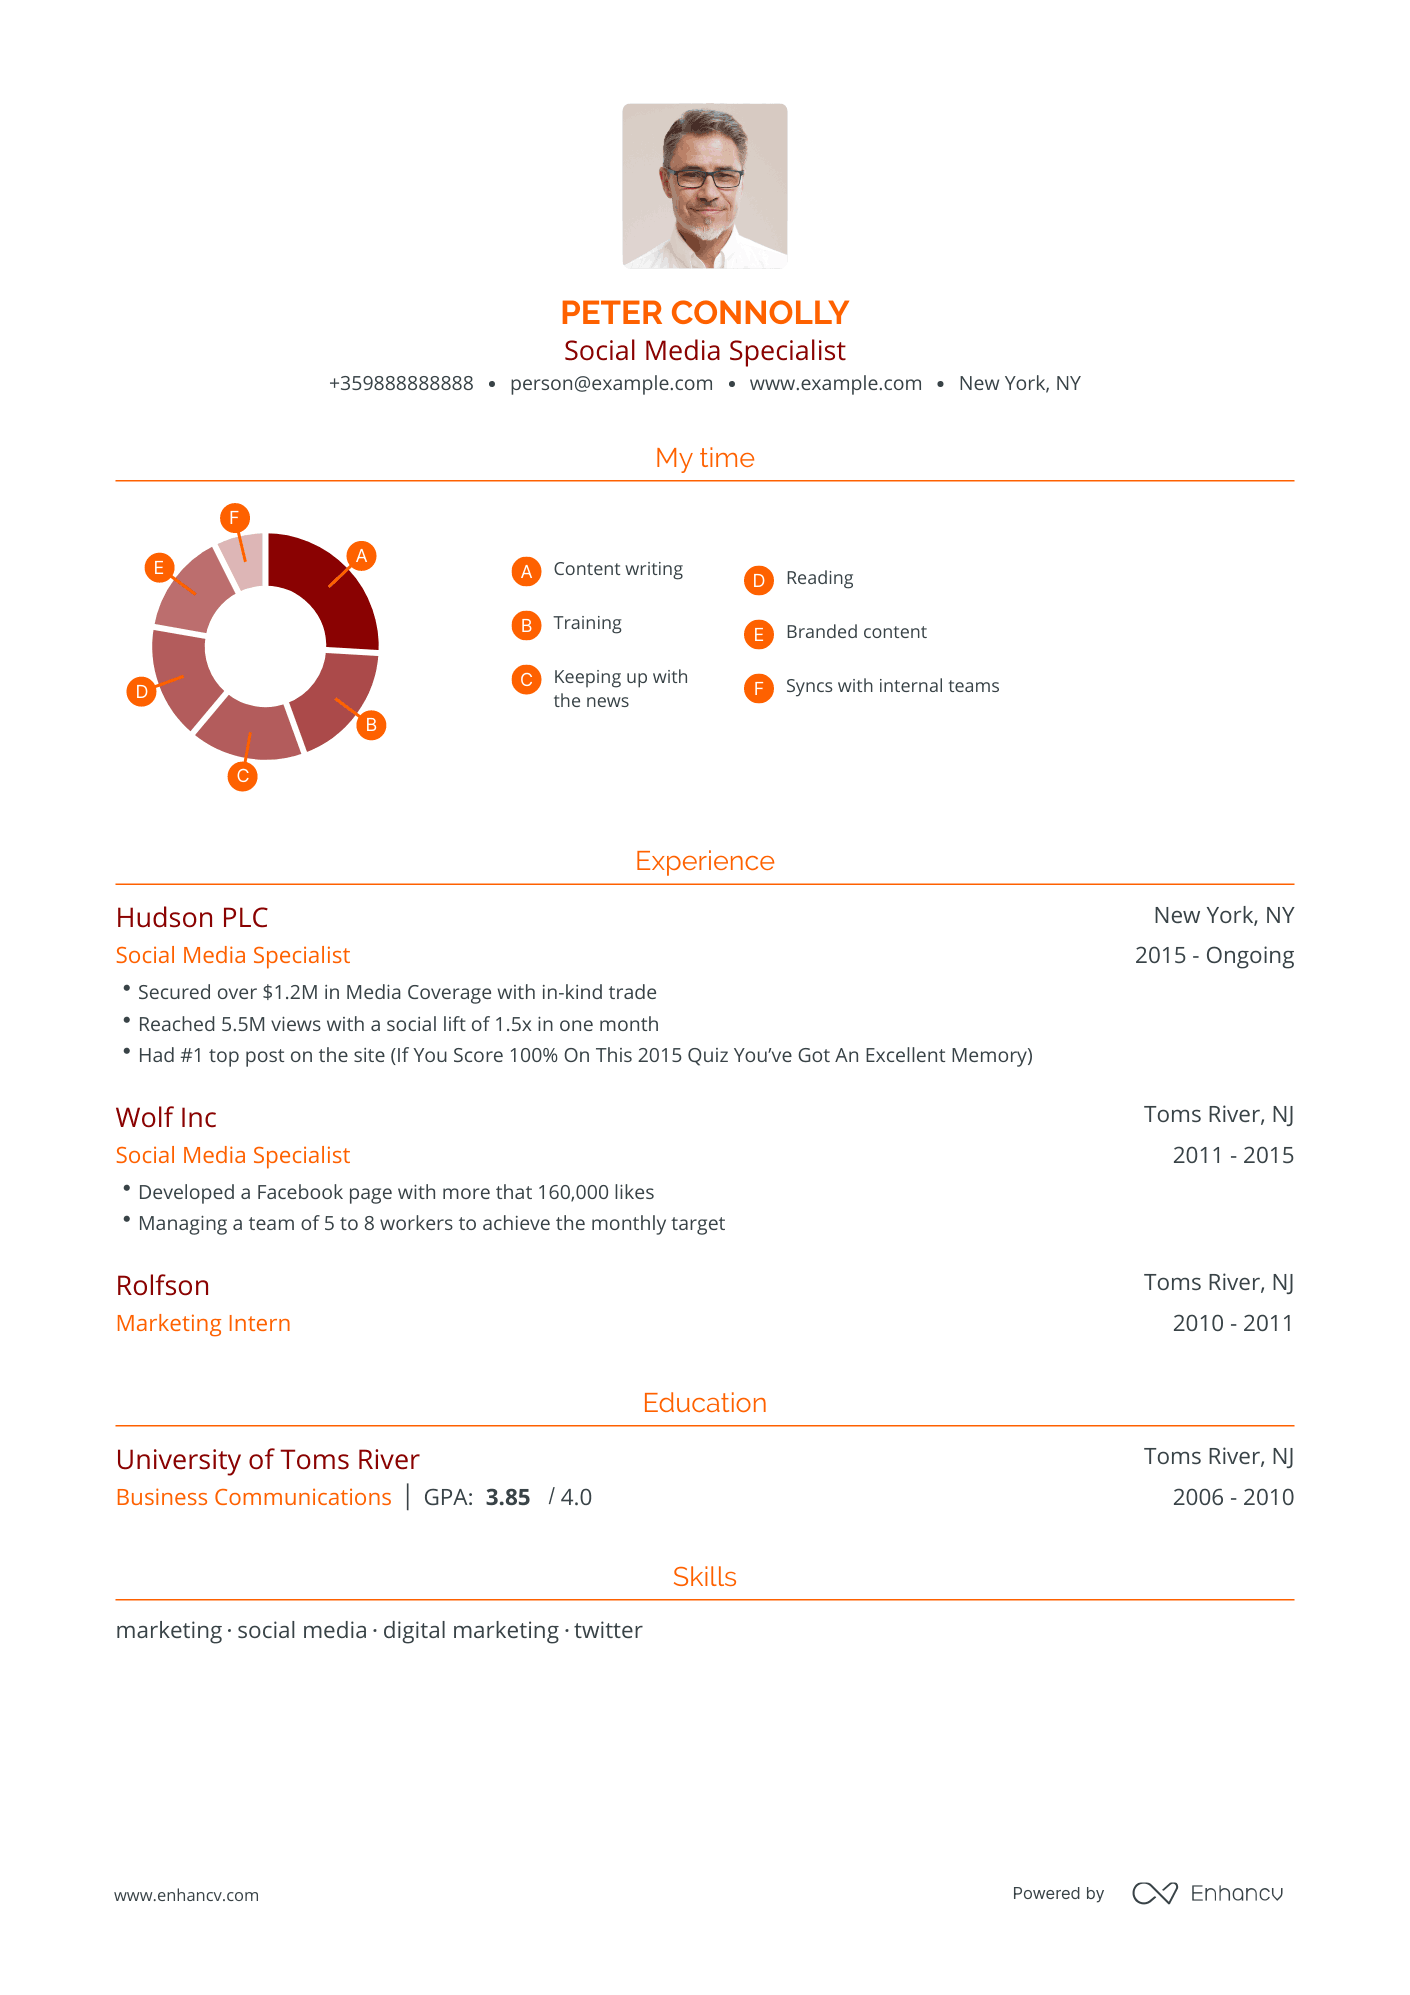 Traditional Social Media Specialist Resume Template